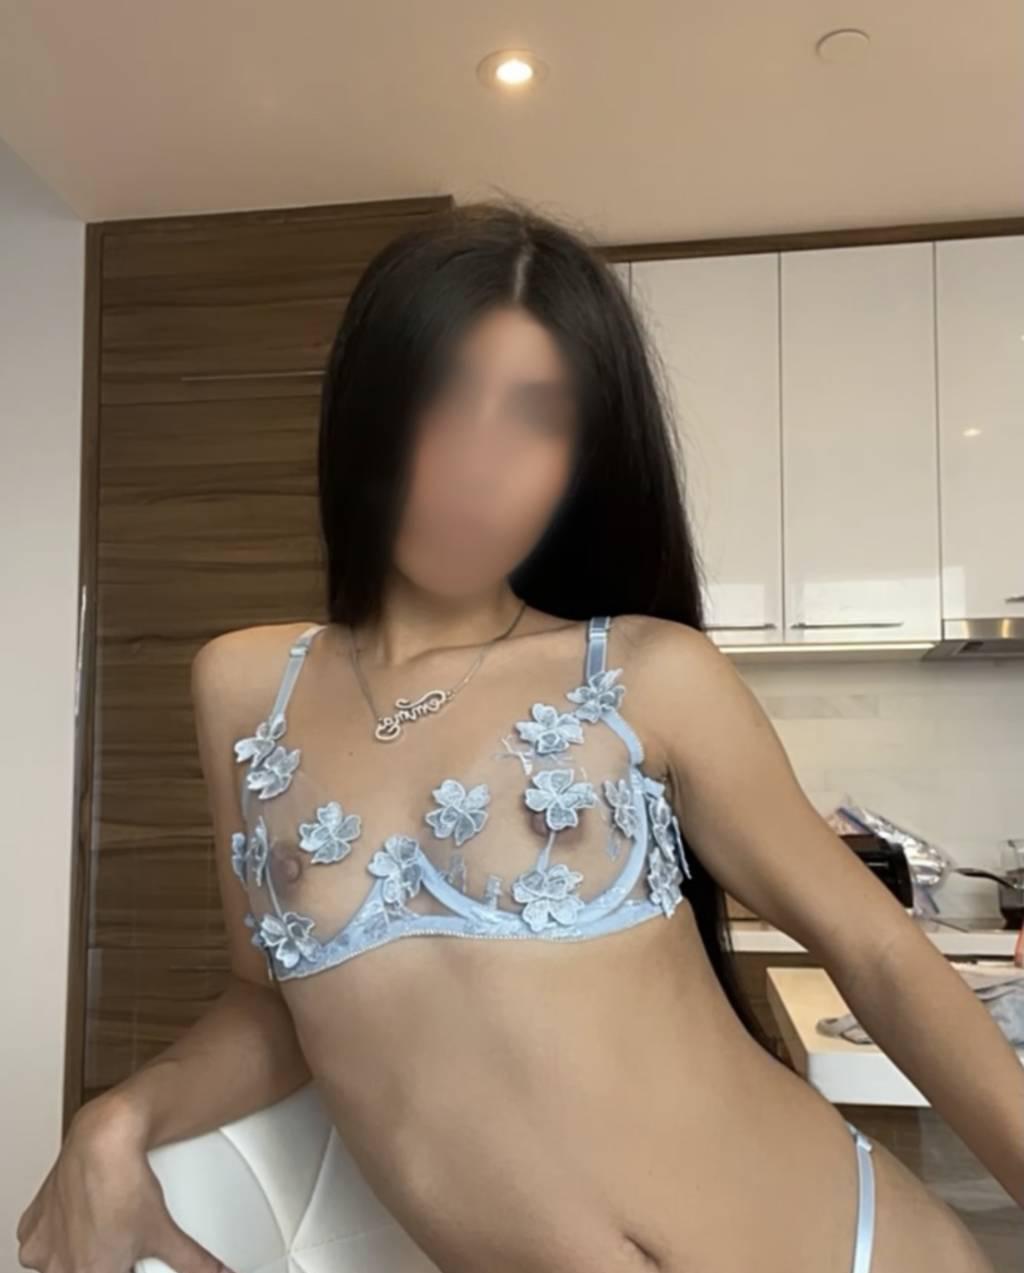 Upscale Brunette Party Doll Here For A Limited Time